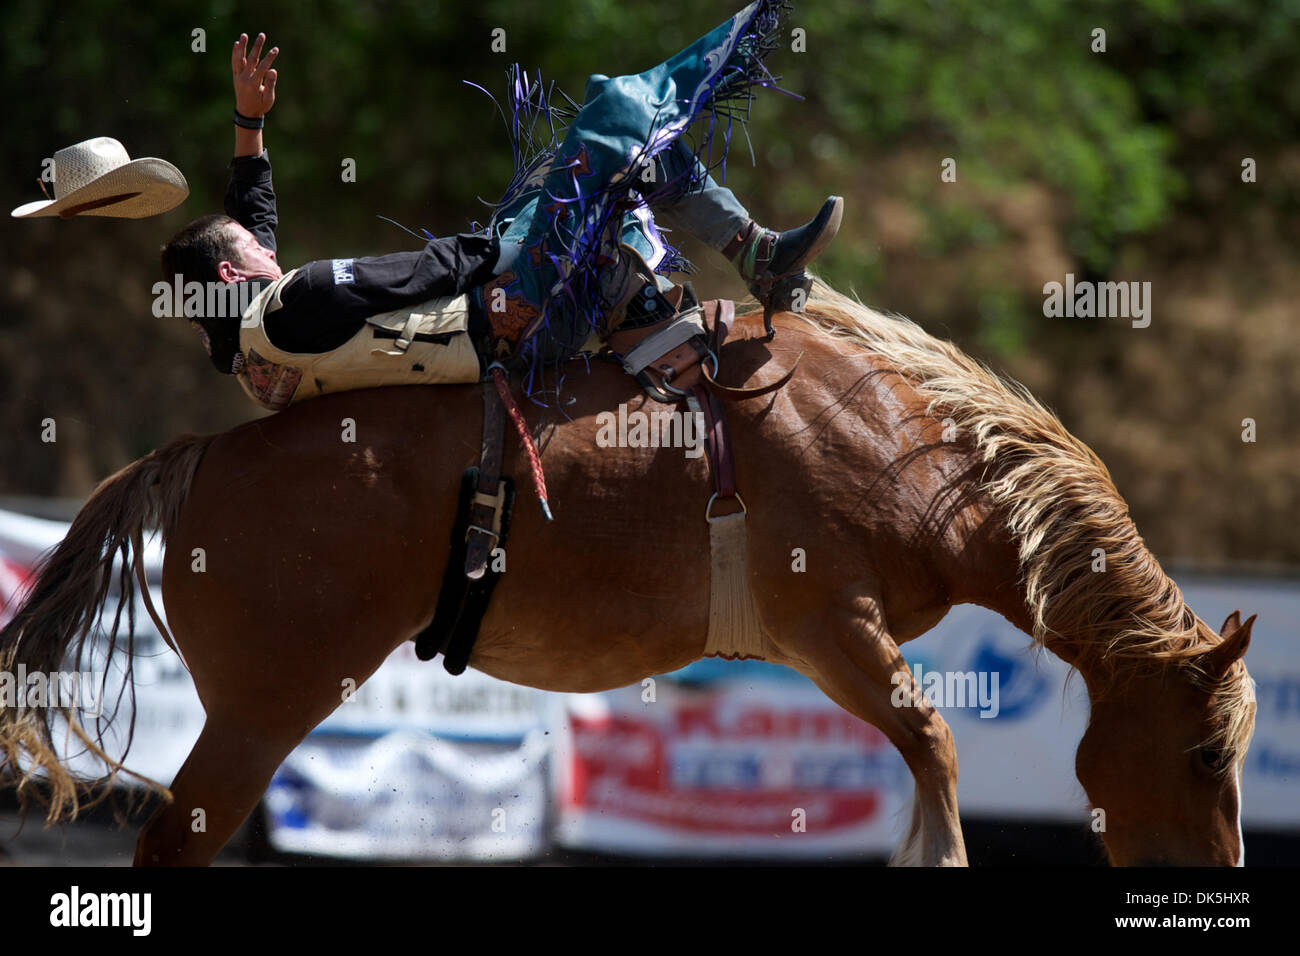 May 7, 2011 - Sonora, California, U.S - R. C. Landingham of Pendleton, OR rides Elizabeth at the Mother Lode Round-Up in Sonora, CA. (Credit Image: © Matt Cohen/Southcreek Global/ZUMAPRESS.com) Stock Photo